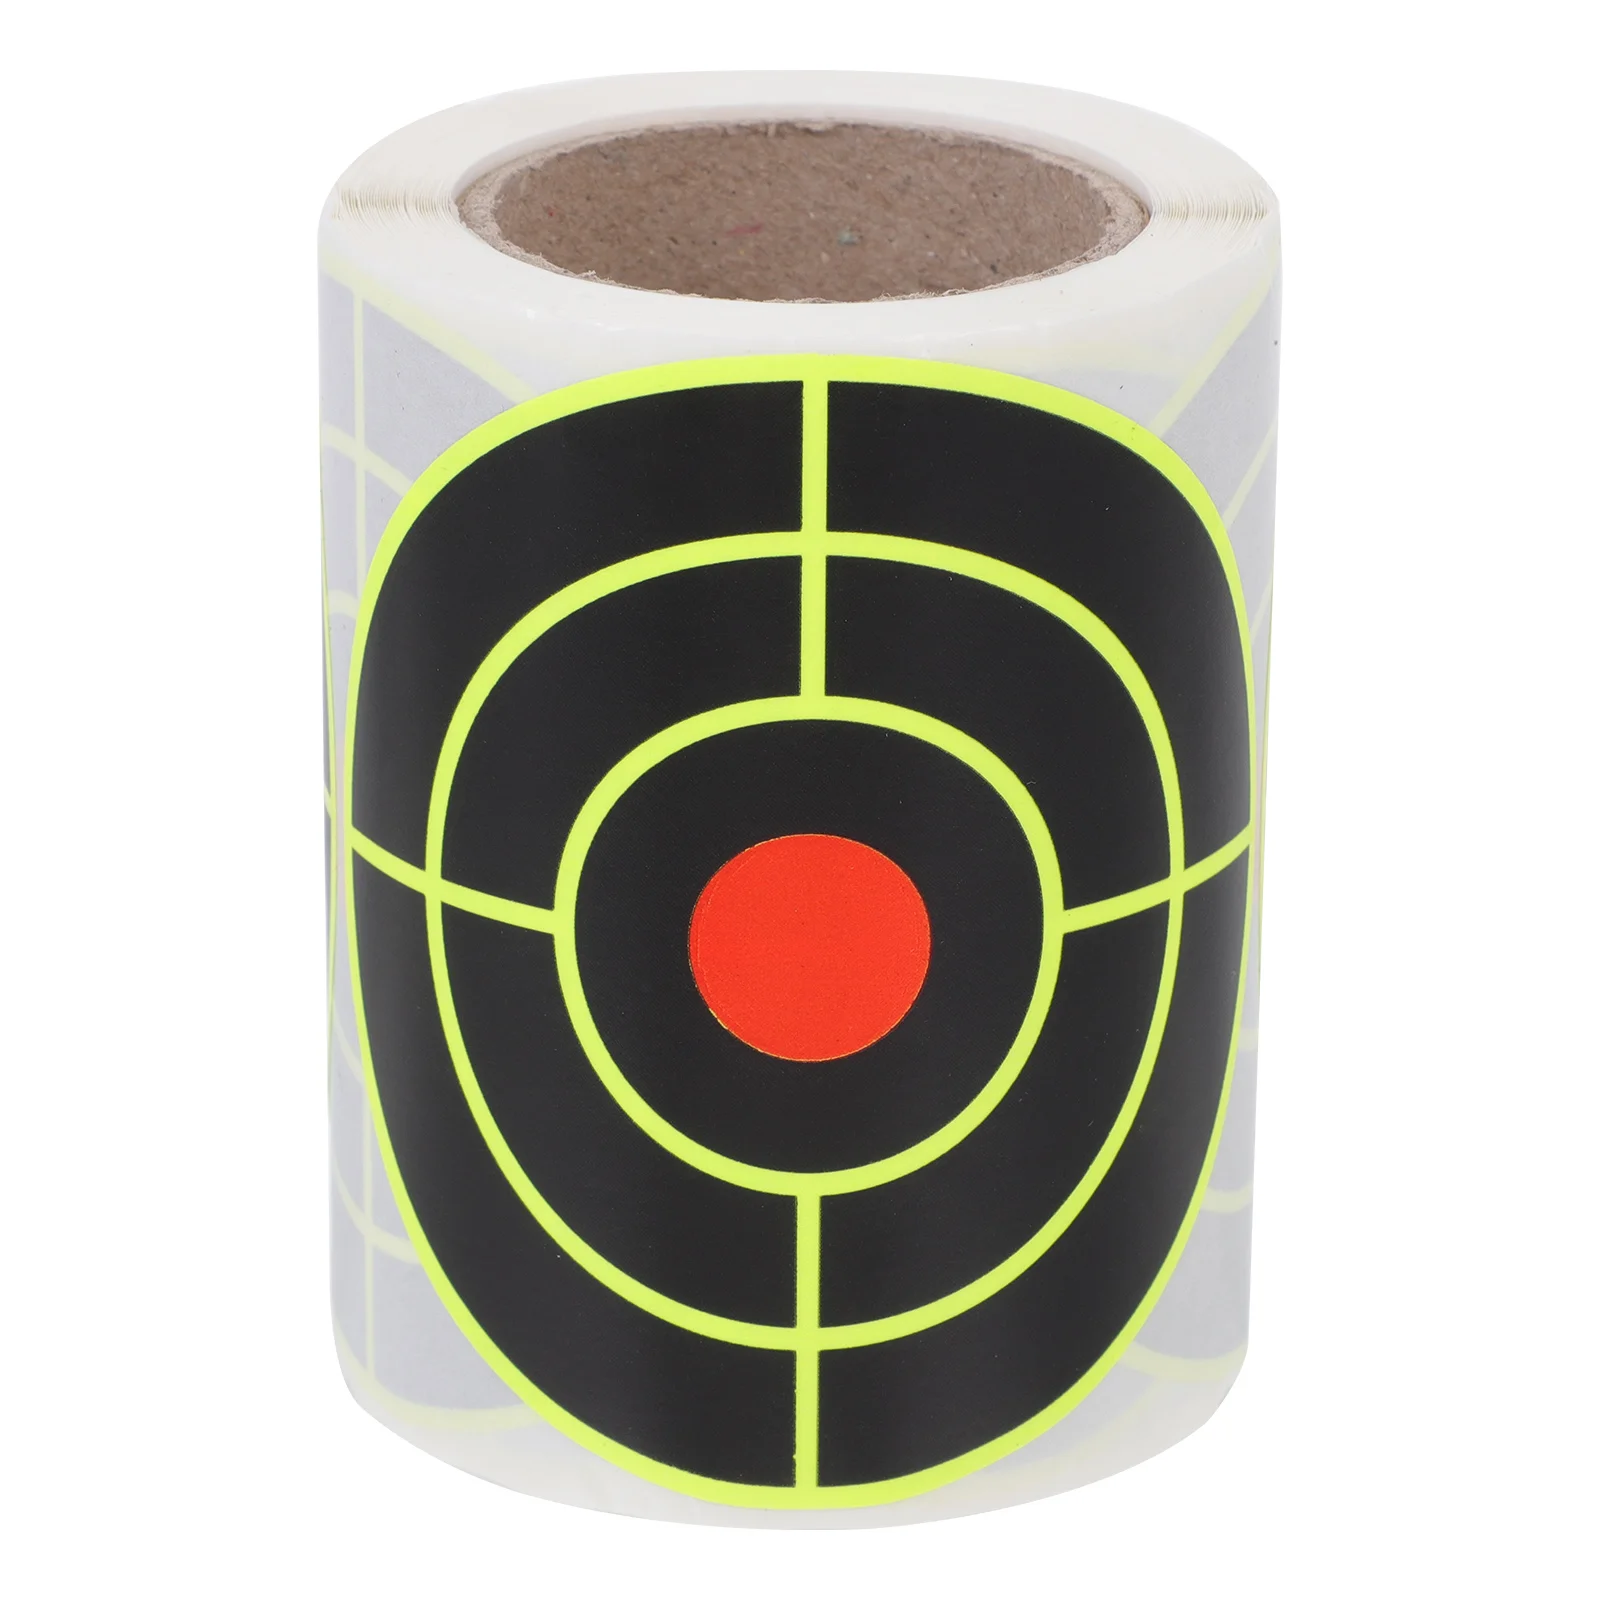 

Aim Target Shooting Papers Paper Fluorescent Stickers Targets Air Training Archery Bow Sticker Range Printed Clear Roll Alloy